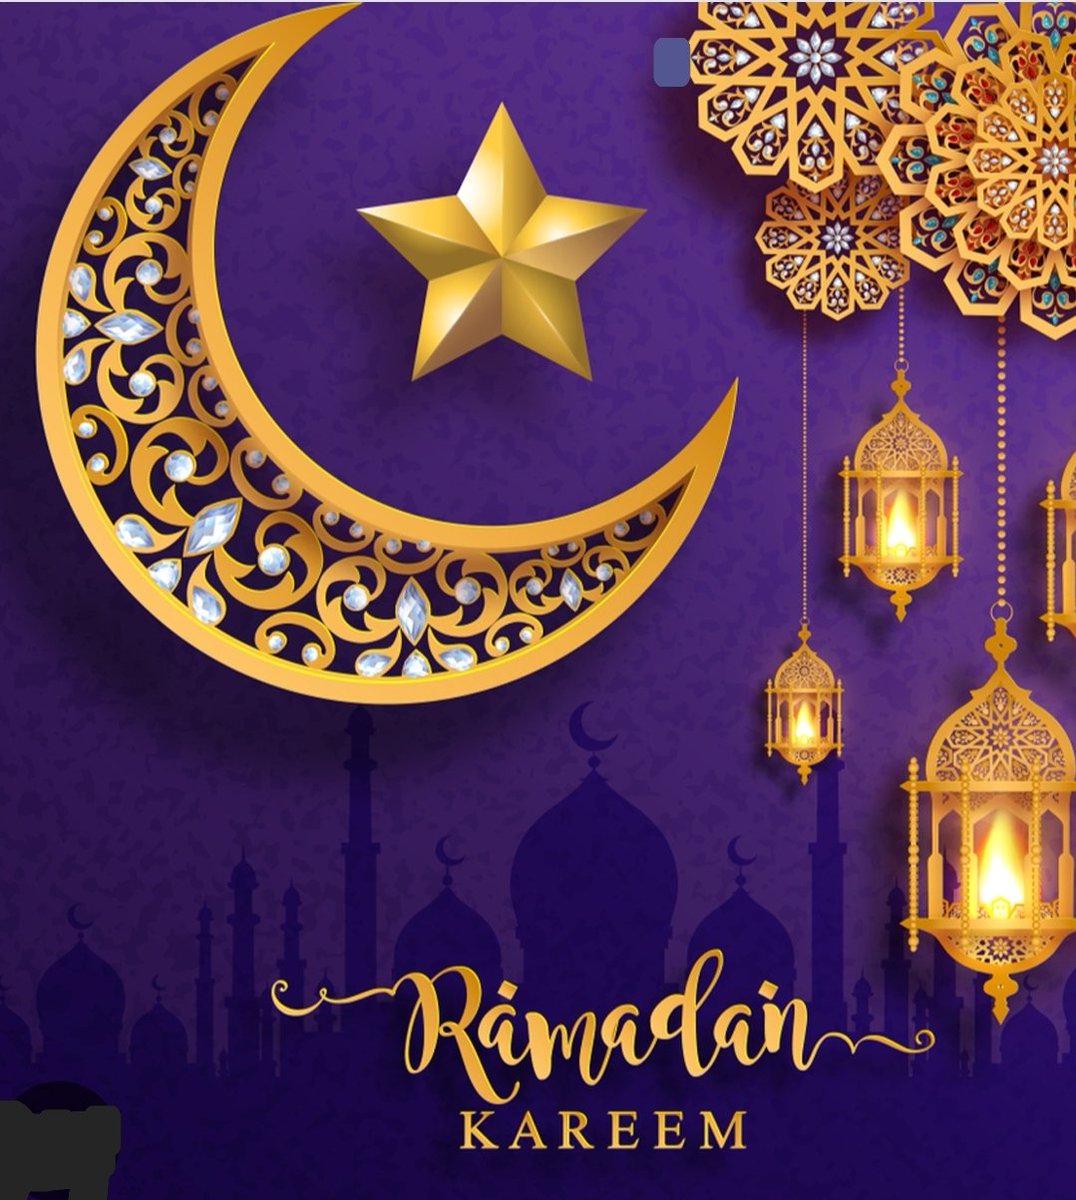 Wishing all members of the Cougar family a Ramadan Kareem! May Ramadan bring you and your family an abundance of blessings @BrooklynSouthHS @pretto_david @NYCSchools @NYPD66Pct